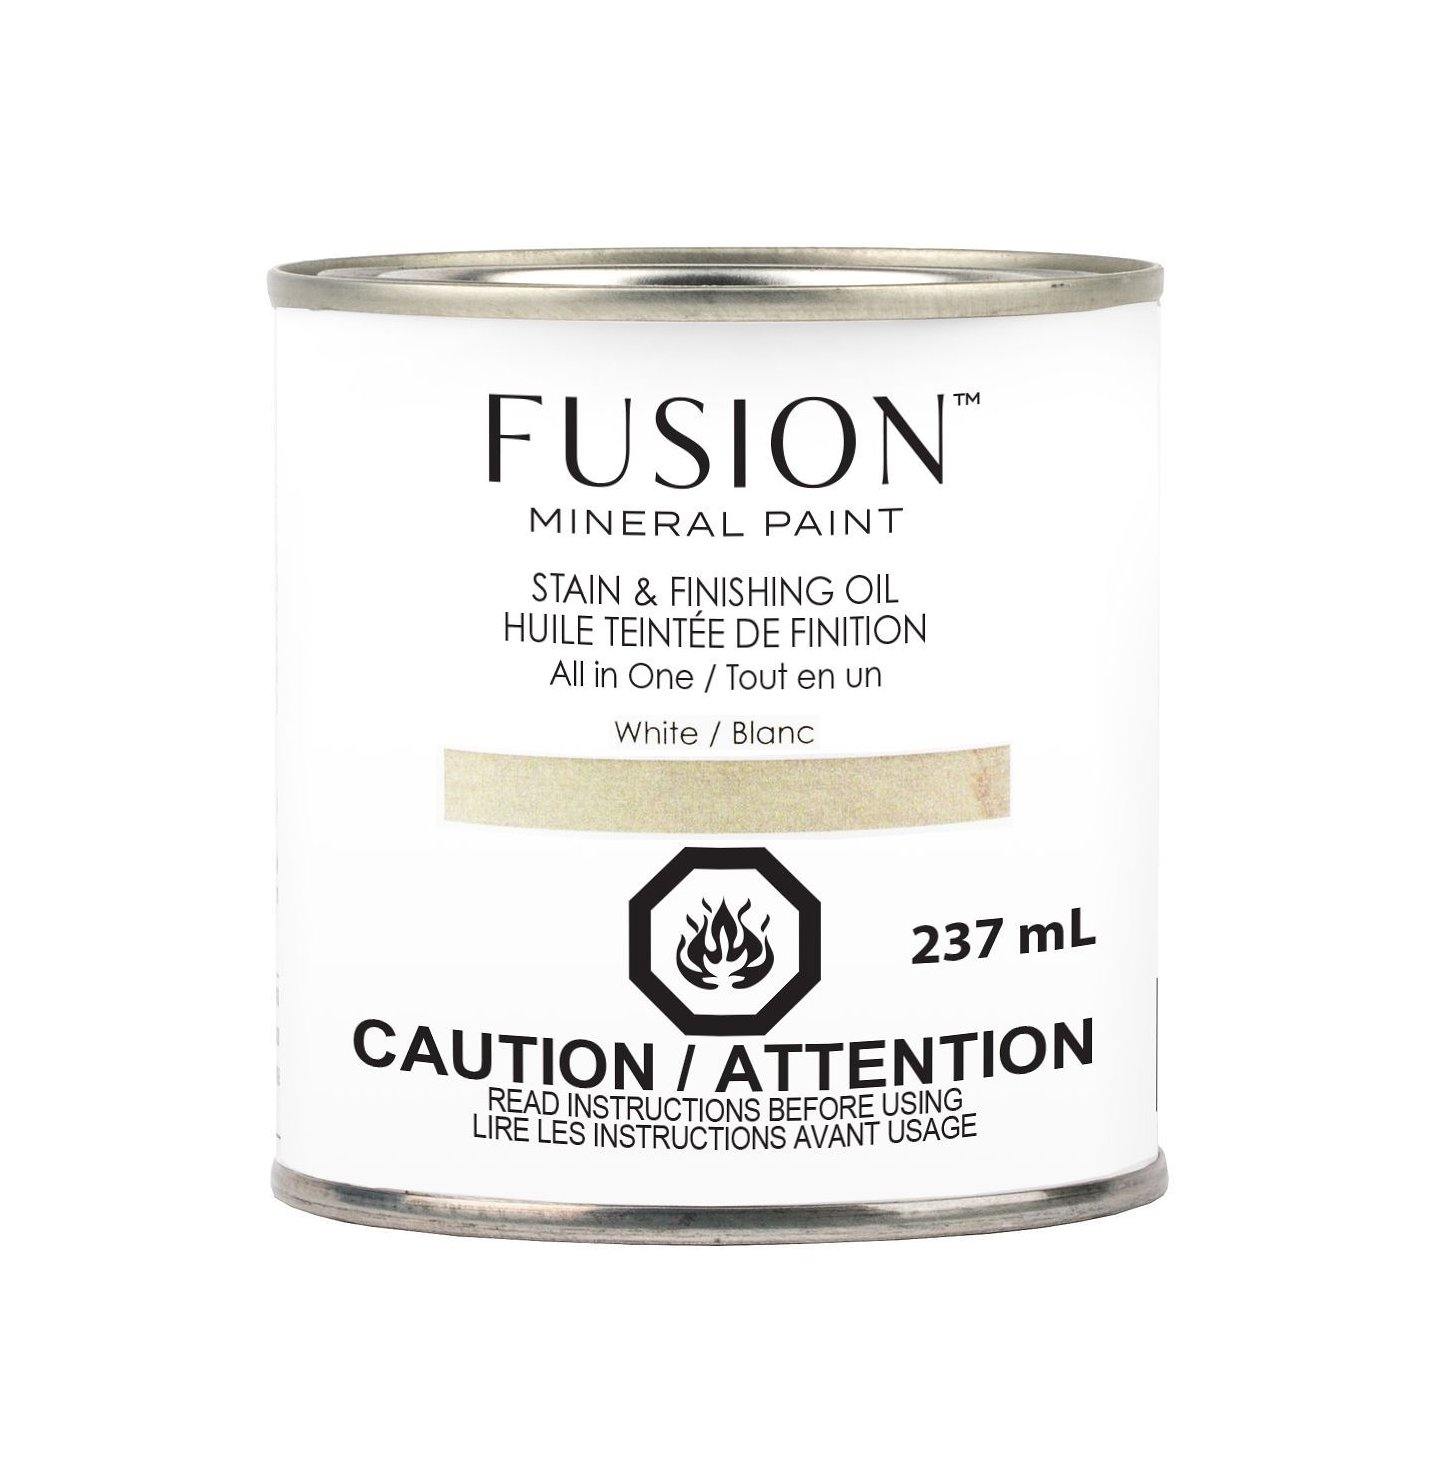 Fusion Mineral Paint Stain and Finishing Oil White